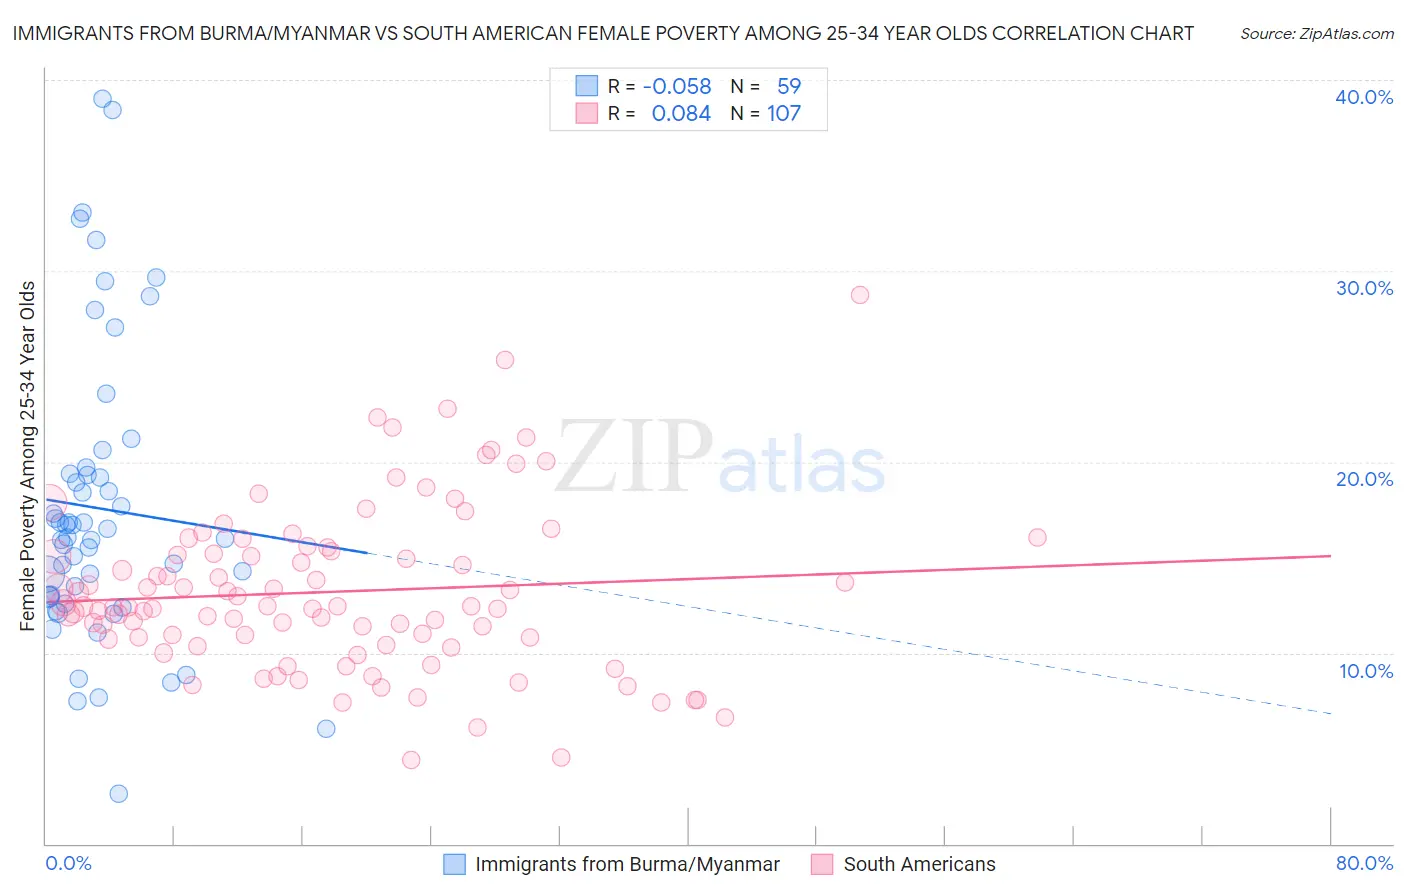 Immigrants from Burma/Myanmar vs South American Female Poverty Among 25-34 Year Olds